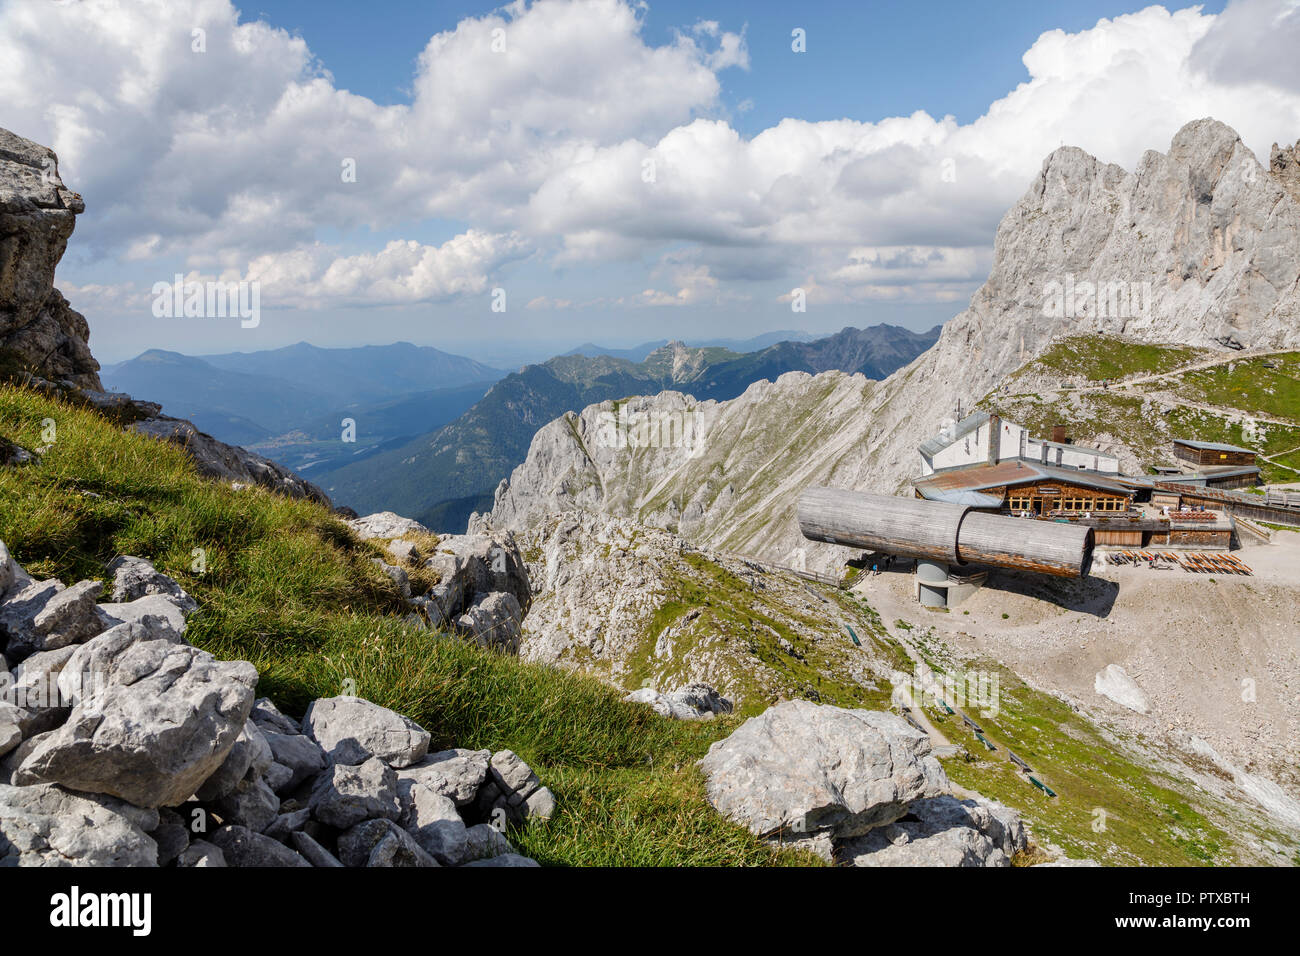 This giant telescope on the Karwendel Mountain is a nature and information centre, Mittenwald, Bavaria, Germany Stock Photo